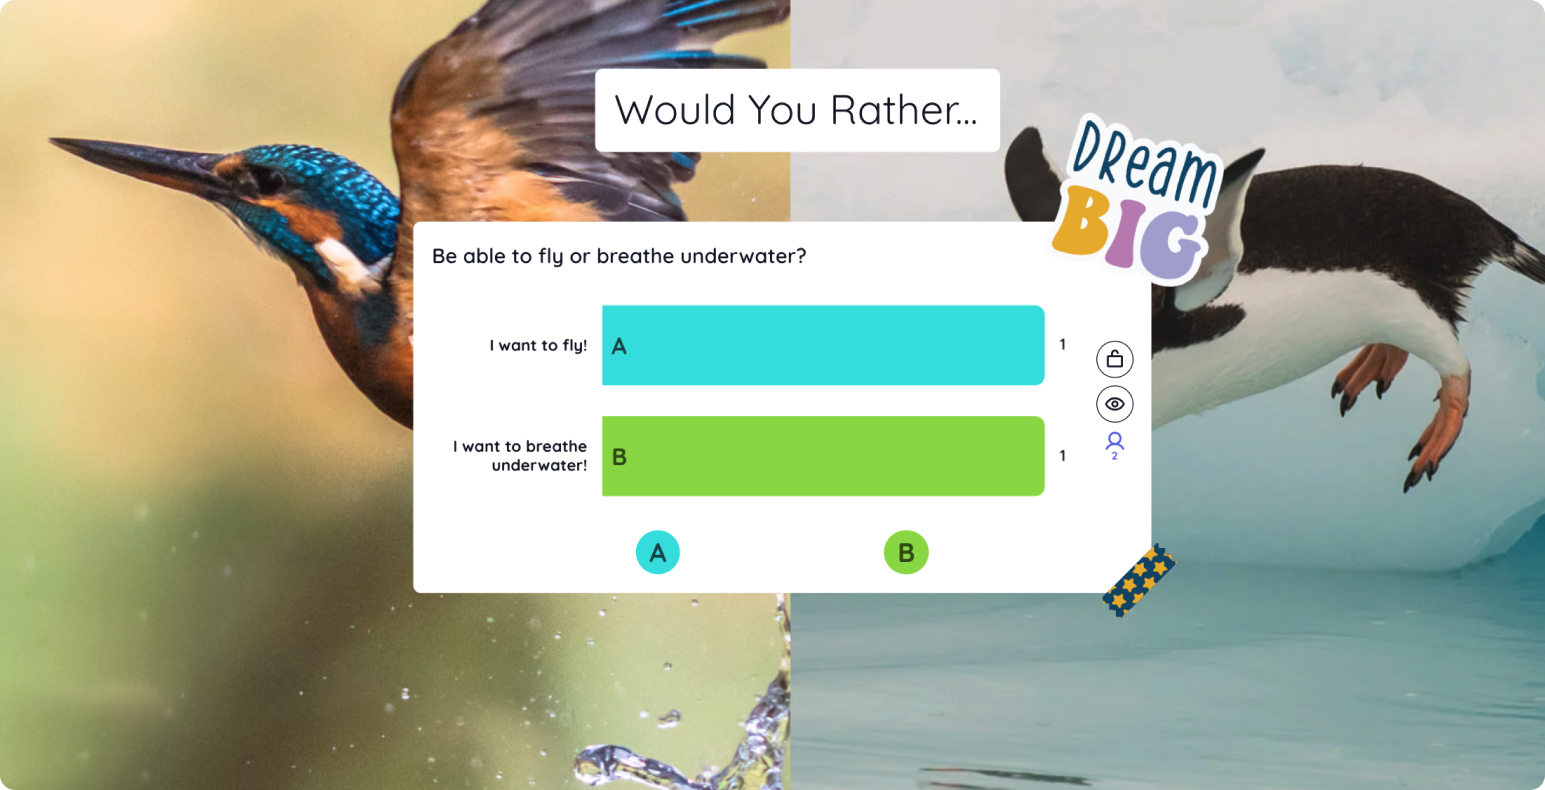 This 'Would You Rather' brain break will not only exercise your student's imagination, but also work great as a ice-breaker for new classes!